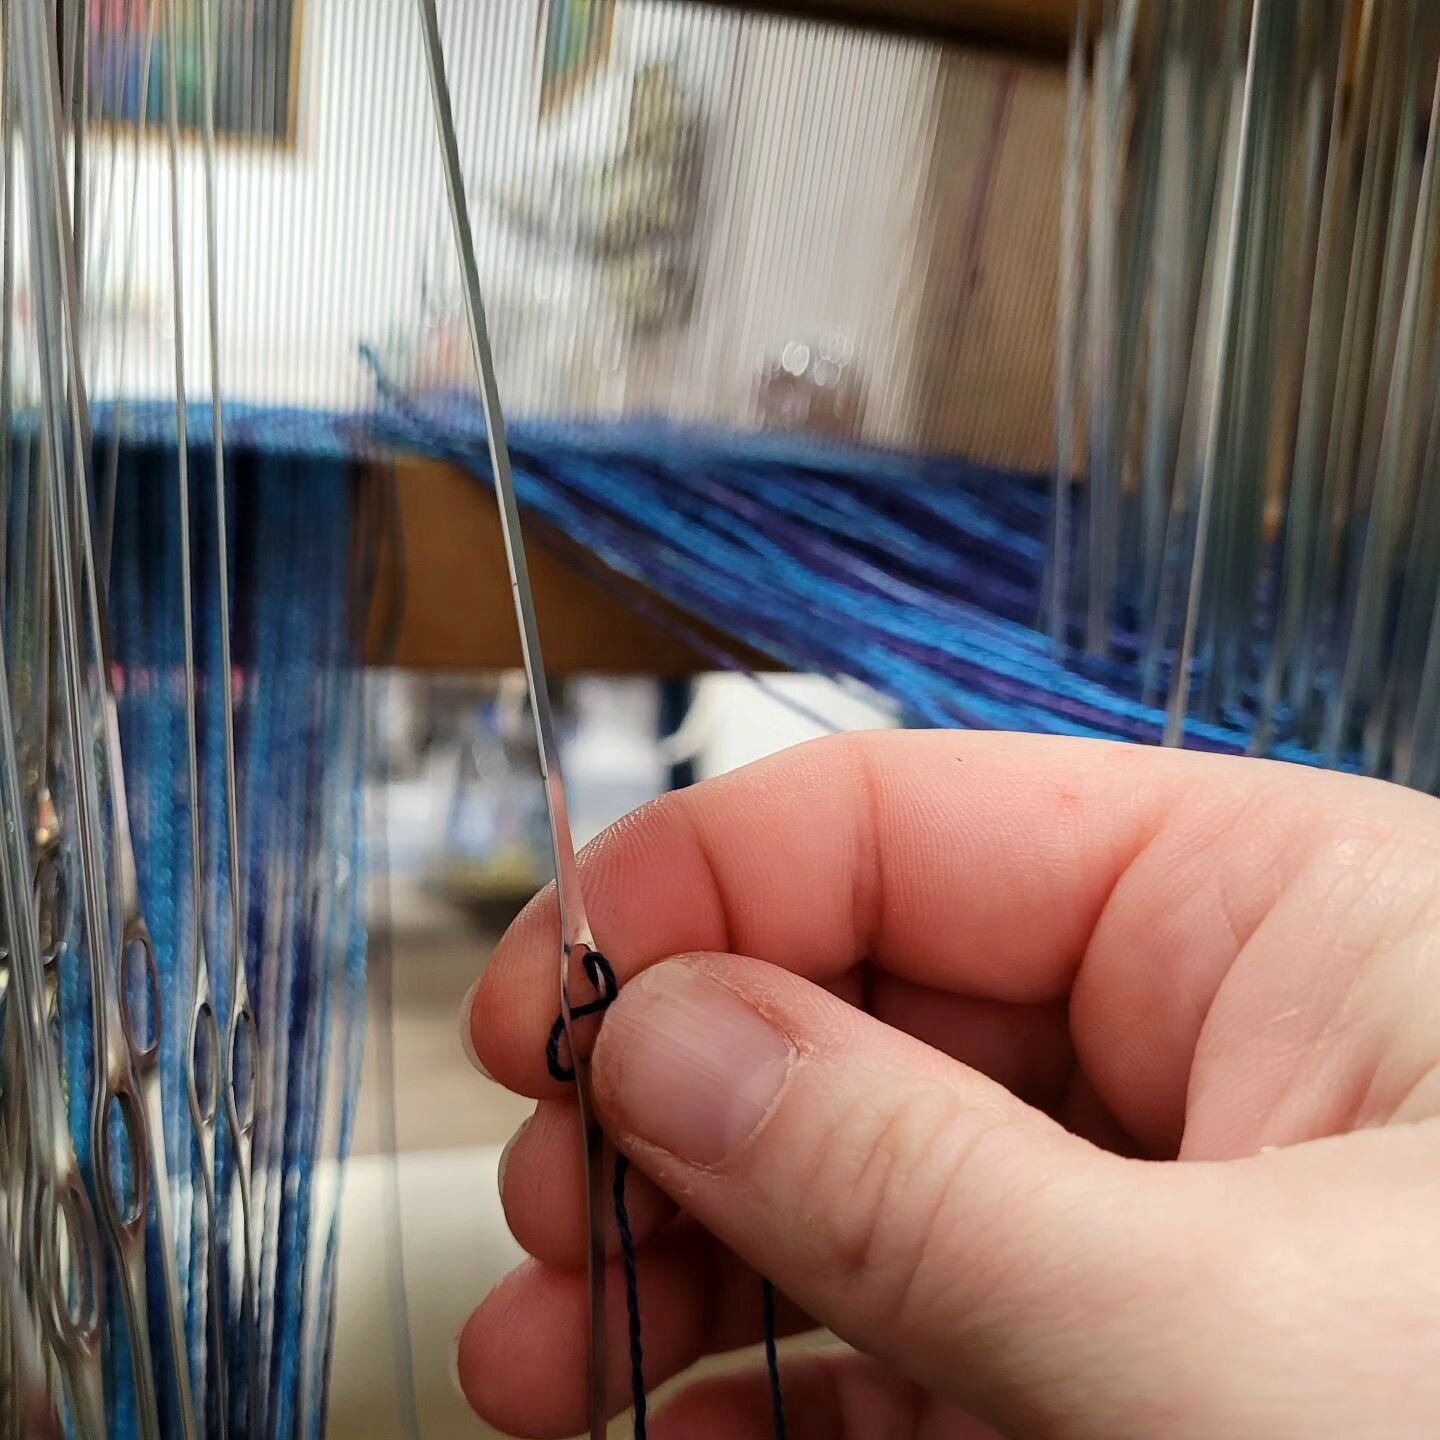 Slowly, but surely, getting my warp threaded this week. 

I had a busy busy busy holiday season, and I'm looking forward to a winter full of weaving. We may even get snow here this weekend!